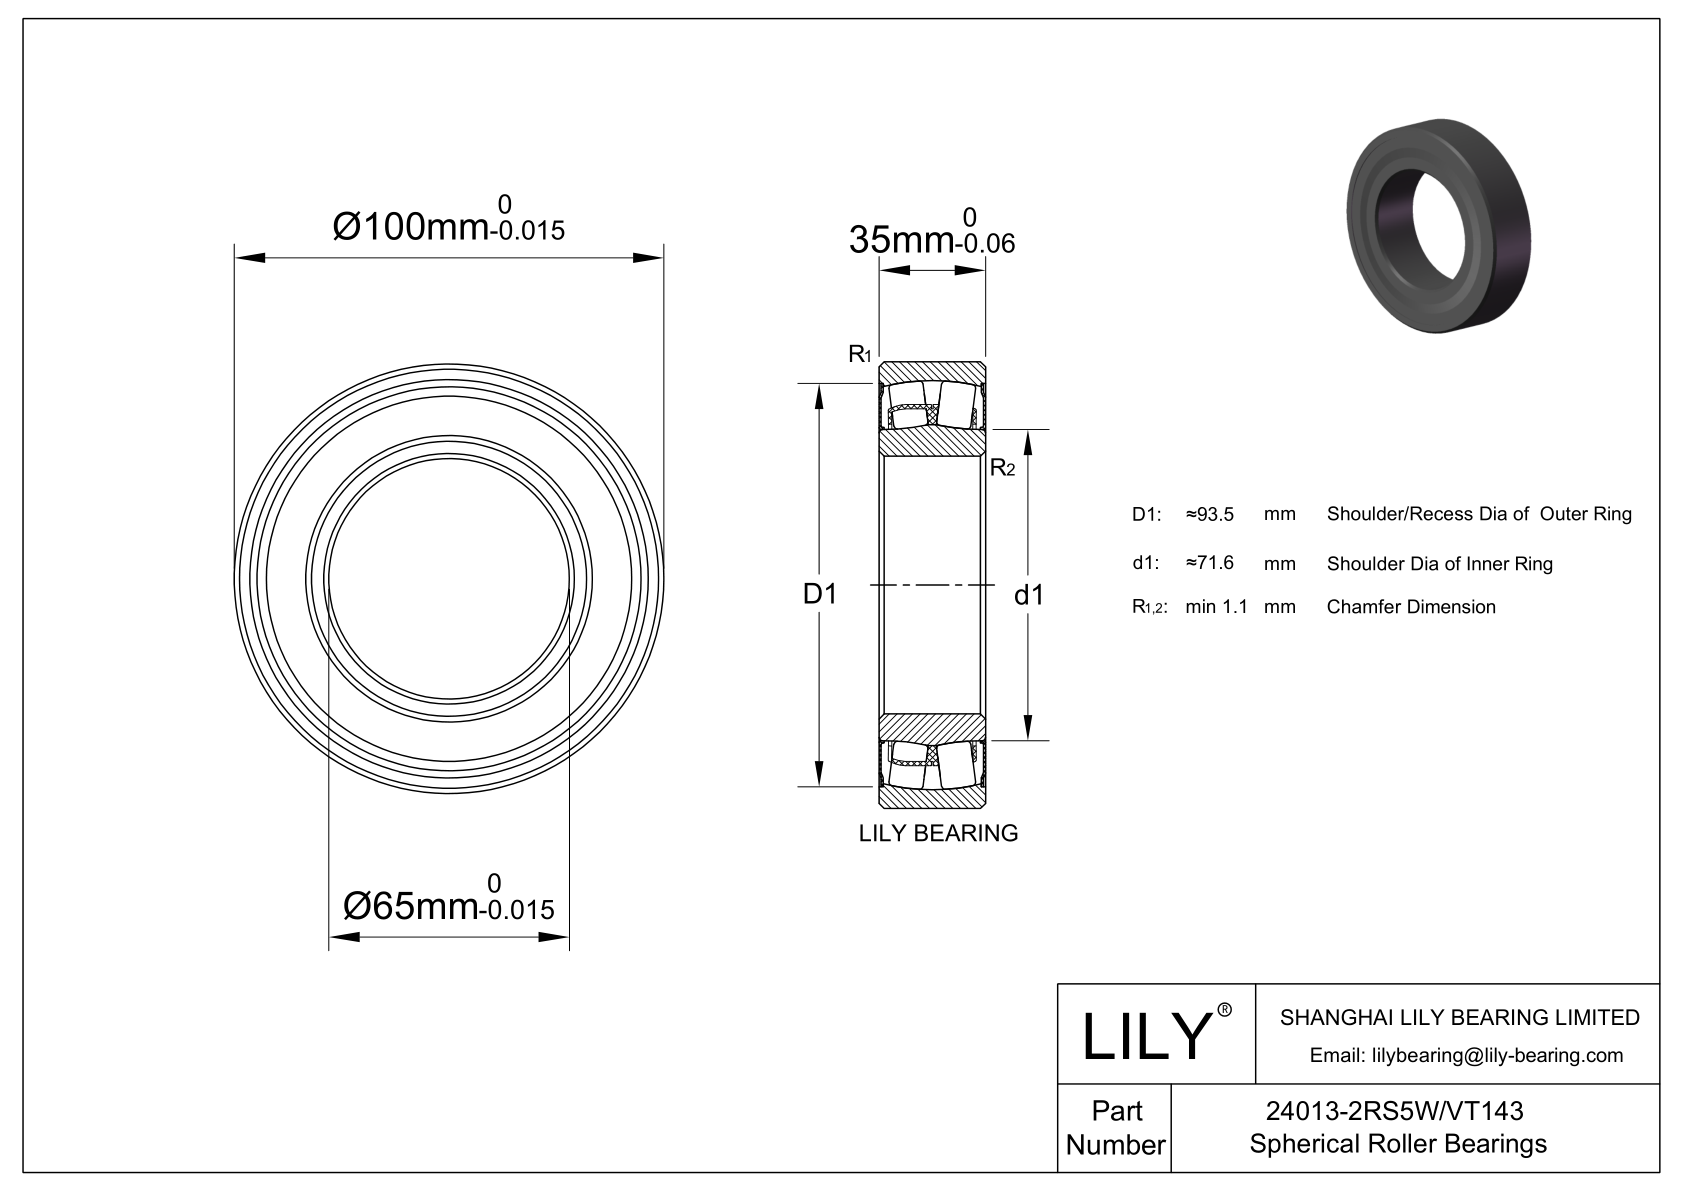 24013-2RS5W/VT143 Double Row Spherical Roller Bearing cad drawing